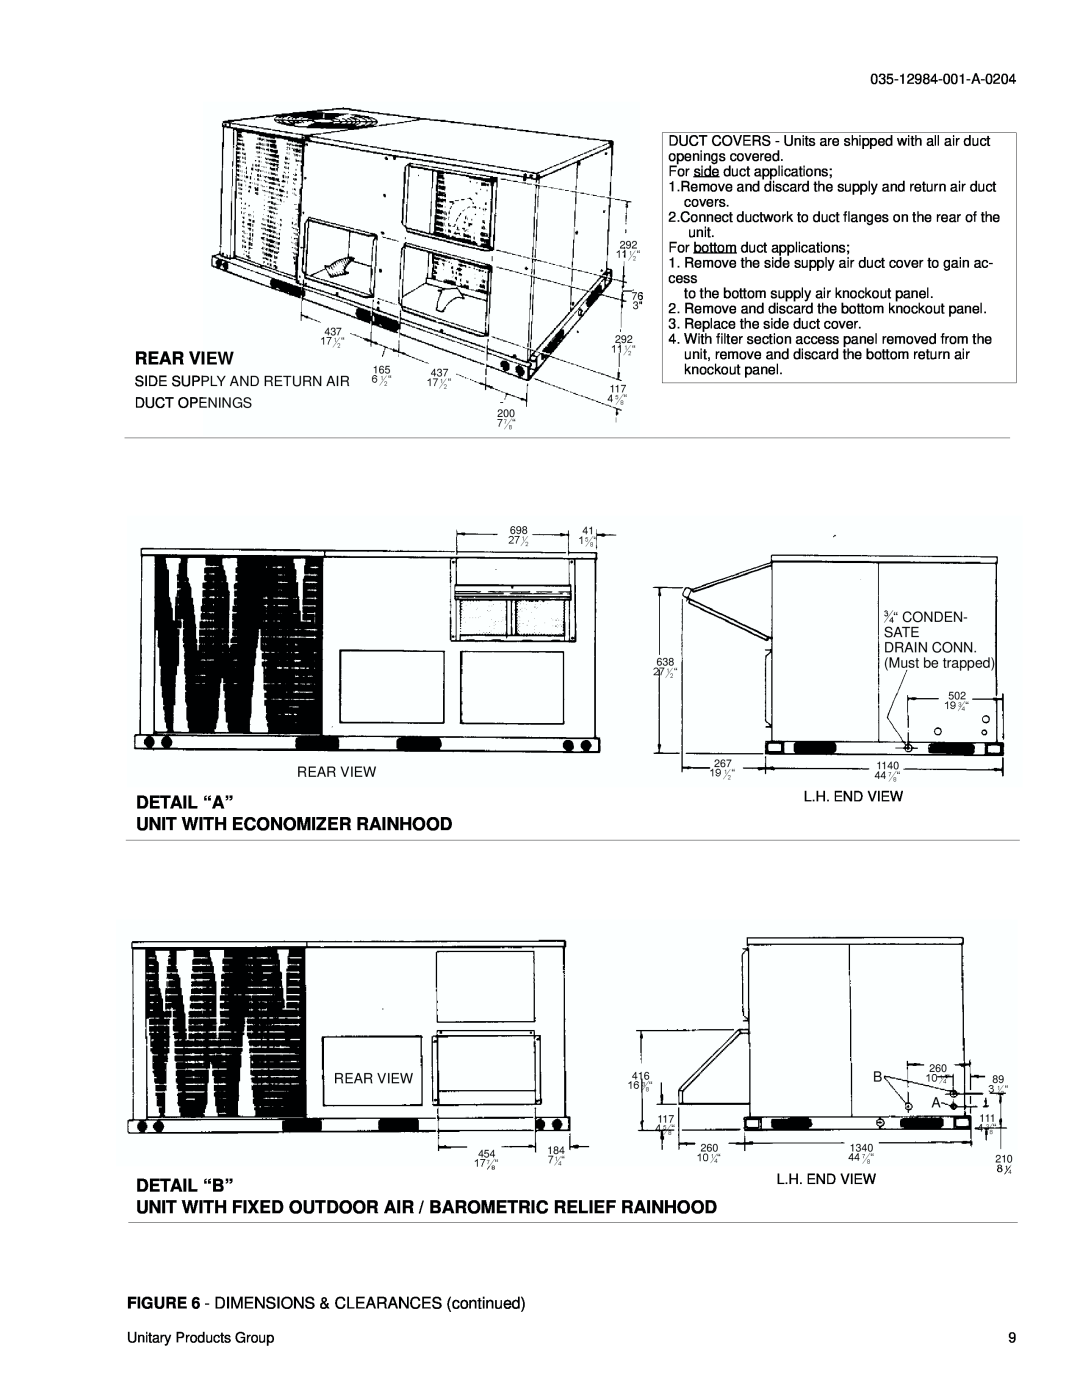 York B3CH 048 and 060 Rear View, Detail “A”, Unit With Economizer Rainhood, Detail “B”, DIMENSIONS & CLEARANCES continued 